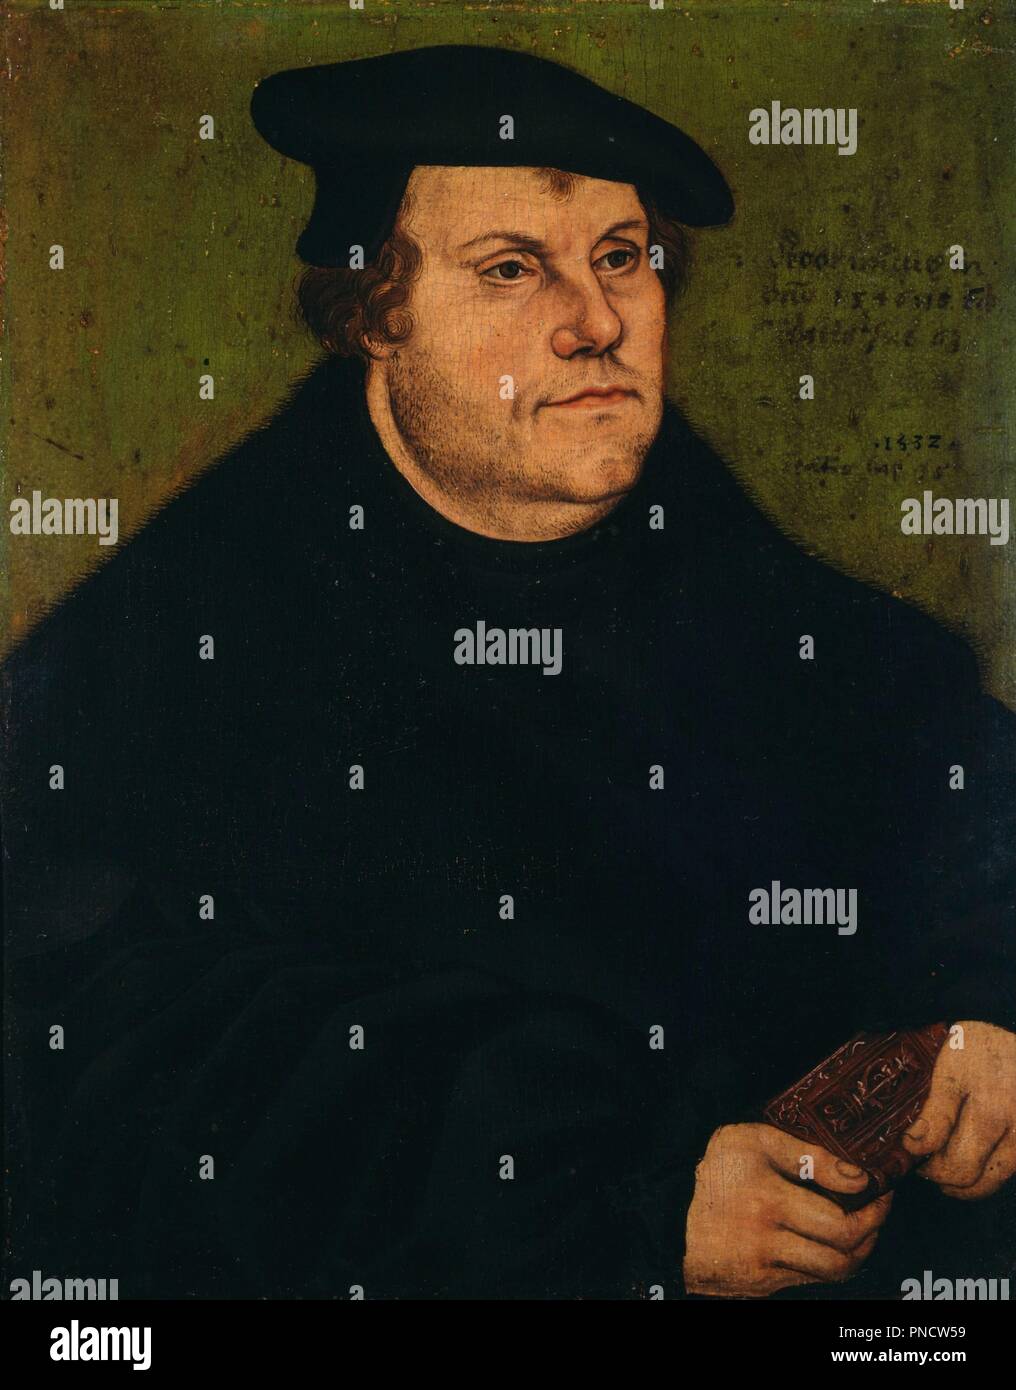 Martin Luther. Date/Period: 1532. Oil on beech wood. Height: 18.3 cm (7.2 in); Width: 15 cm (5.9 in). Author: Cranach the Elder, Lucas. LUCAS CRANACH, THE ELDER. Stock Photo